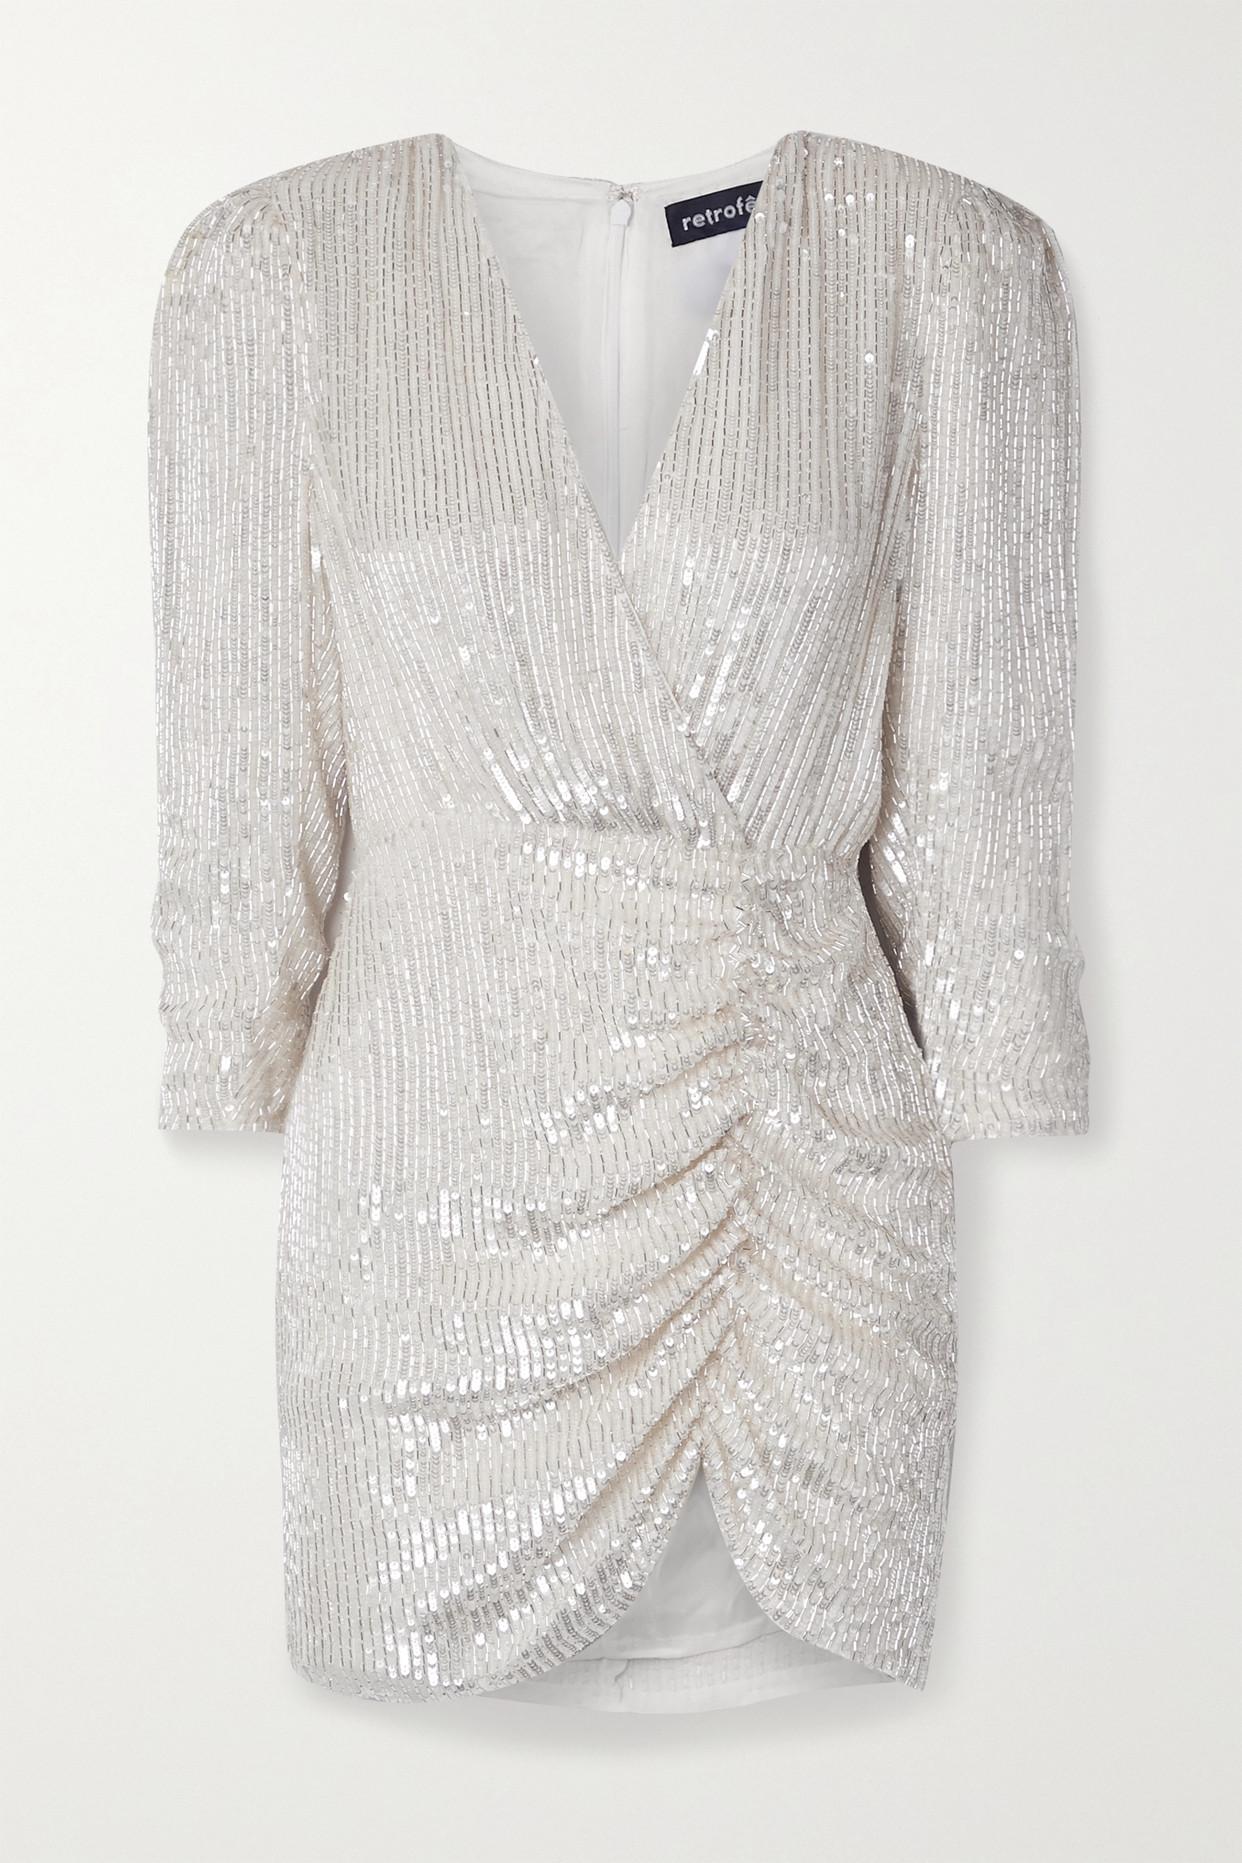 retroféte Stacey Gathered Embellished Chiffon Mini Dress in White | Lyst